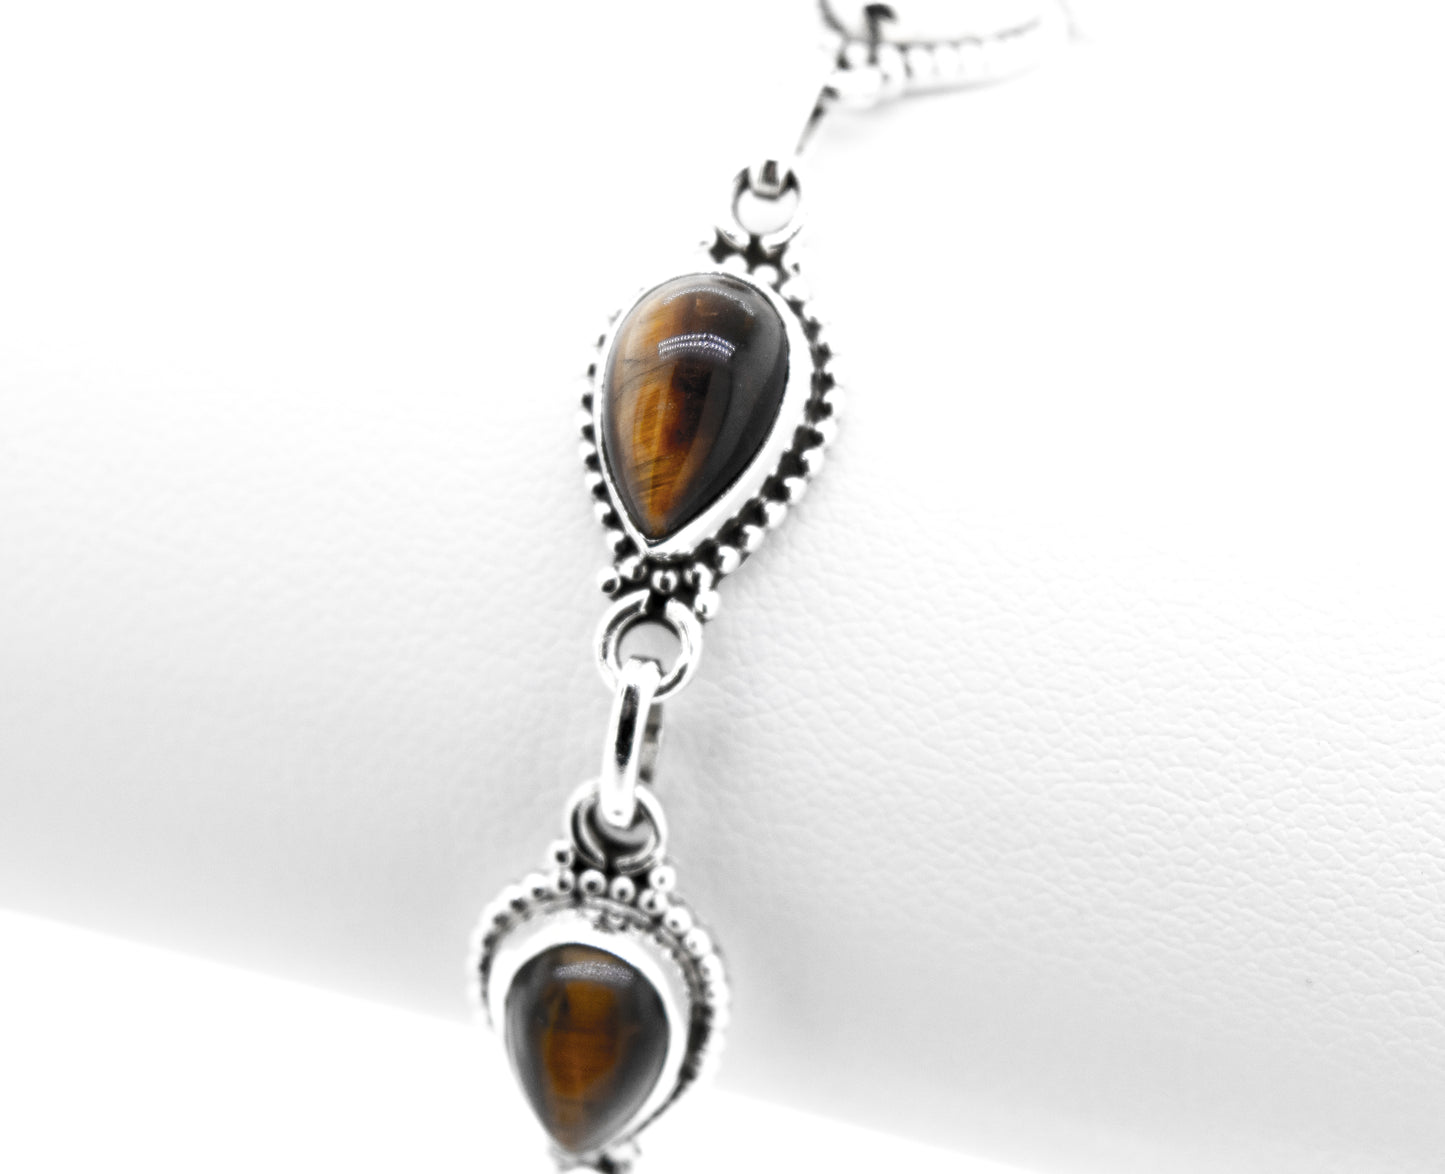 
                  
                    A Teardrop Shape Stone Bracelet With Ball Border featuring tear-shaped tiger's eye gemstones set in .925 silver, attached with circular links, displayed on a white background.
                  
                